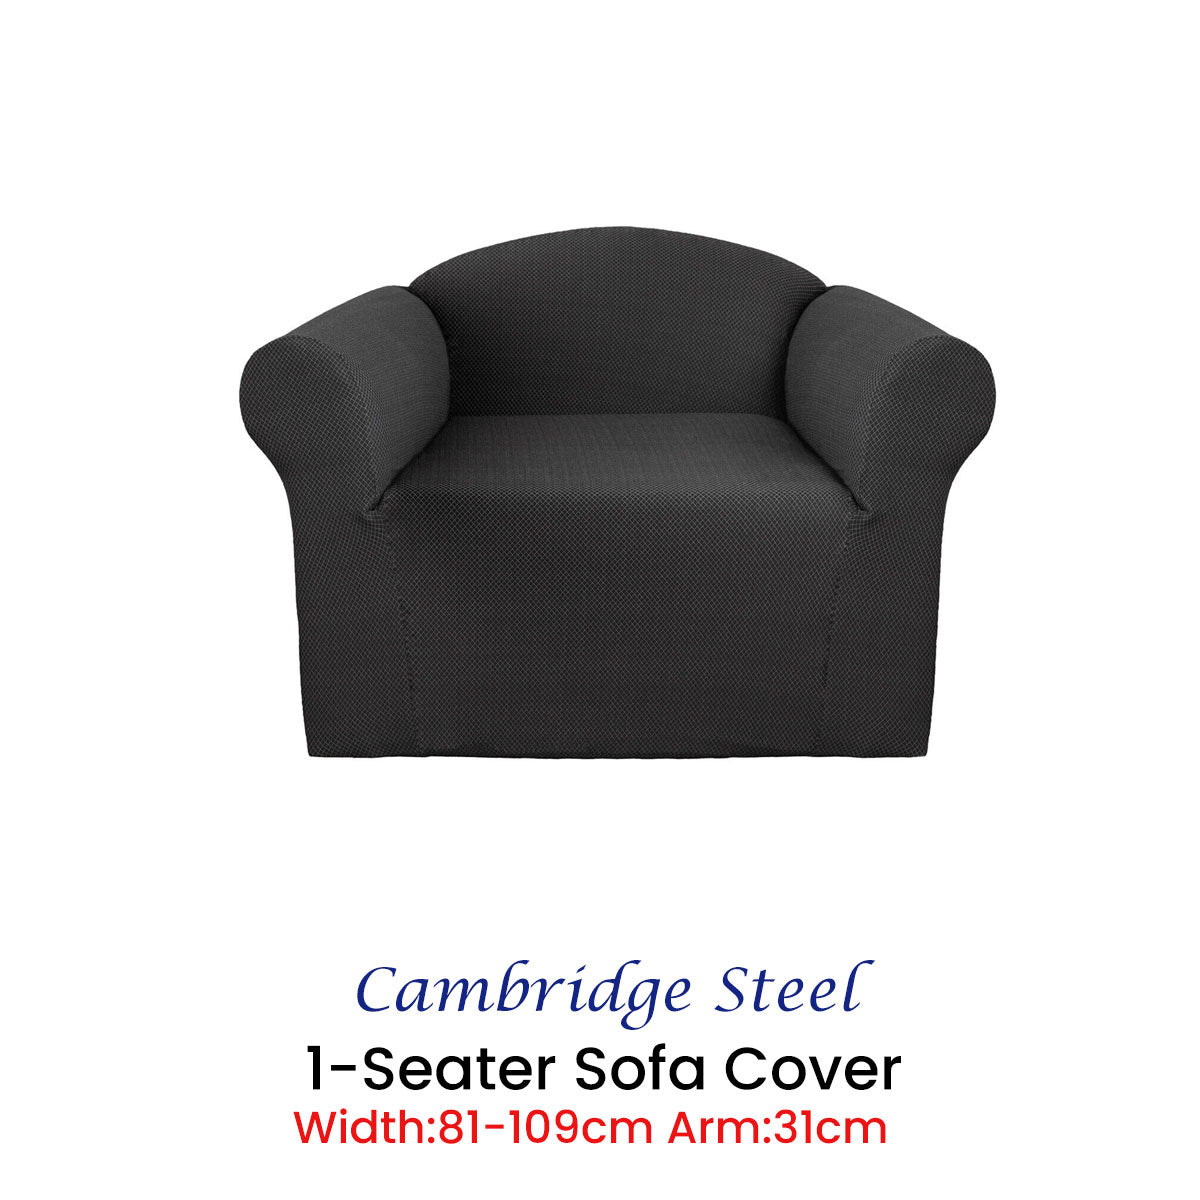 Cambridge Extra-stretch Couch Cover Steel One Seater Steel